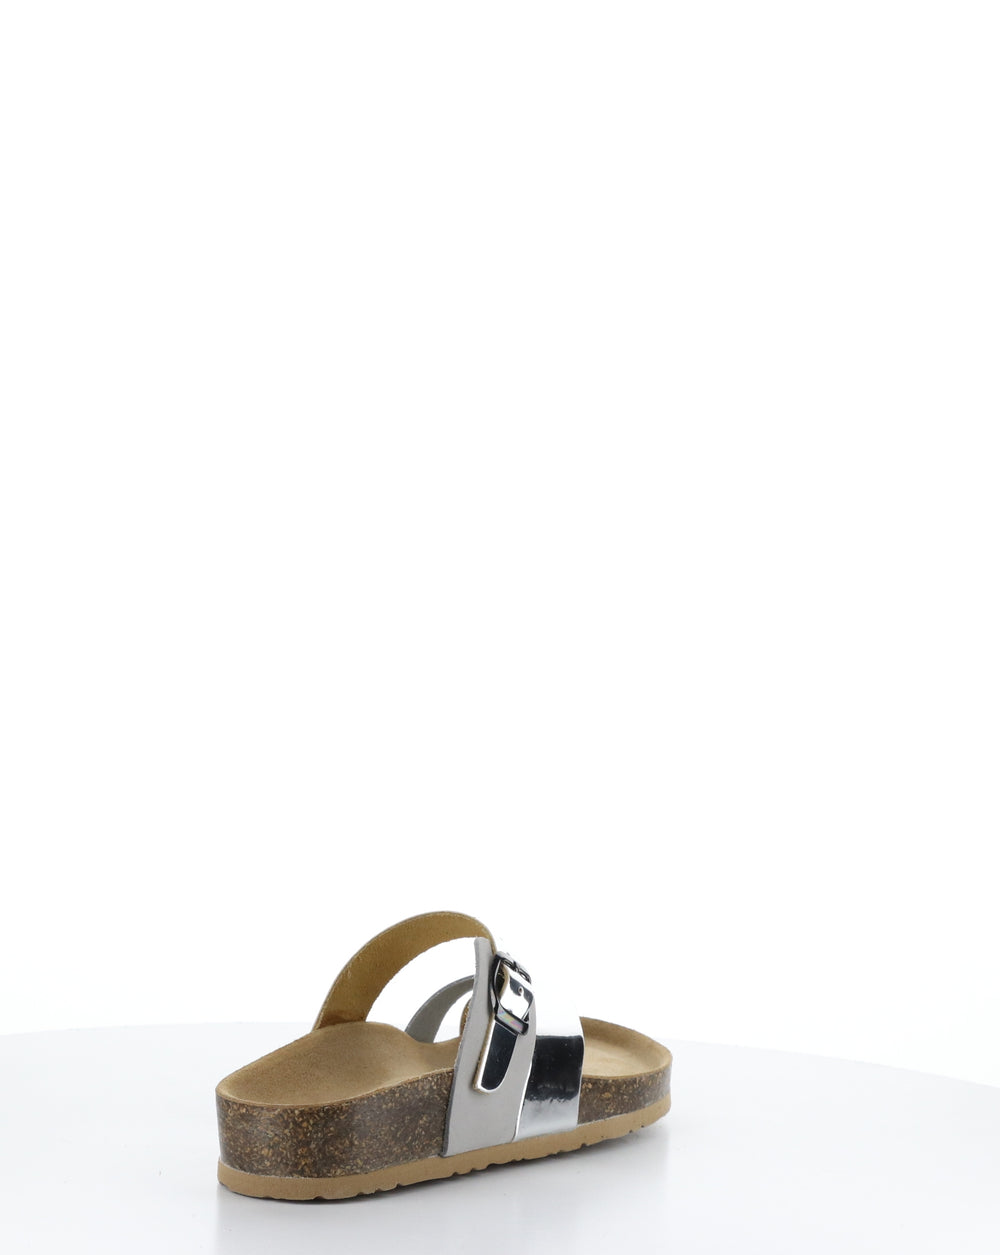 PARR PEARL/SILVER Slip-on Sandals